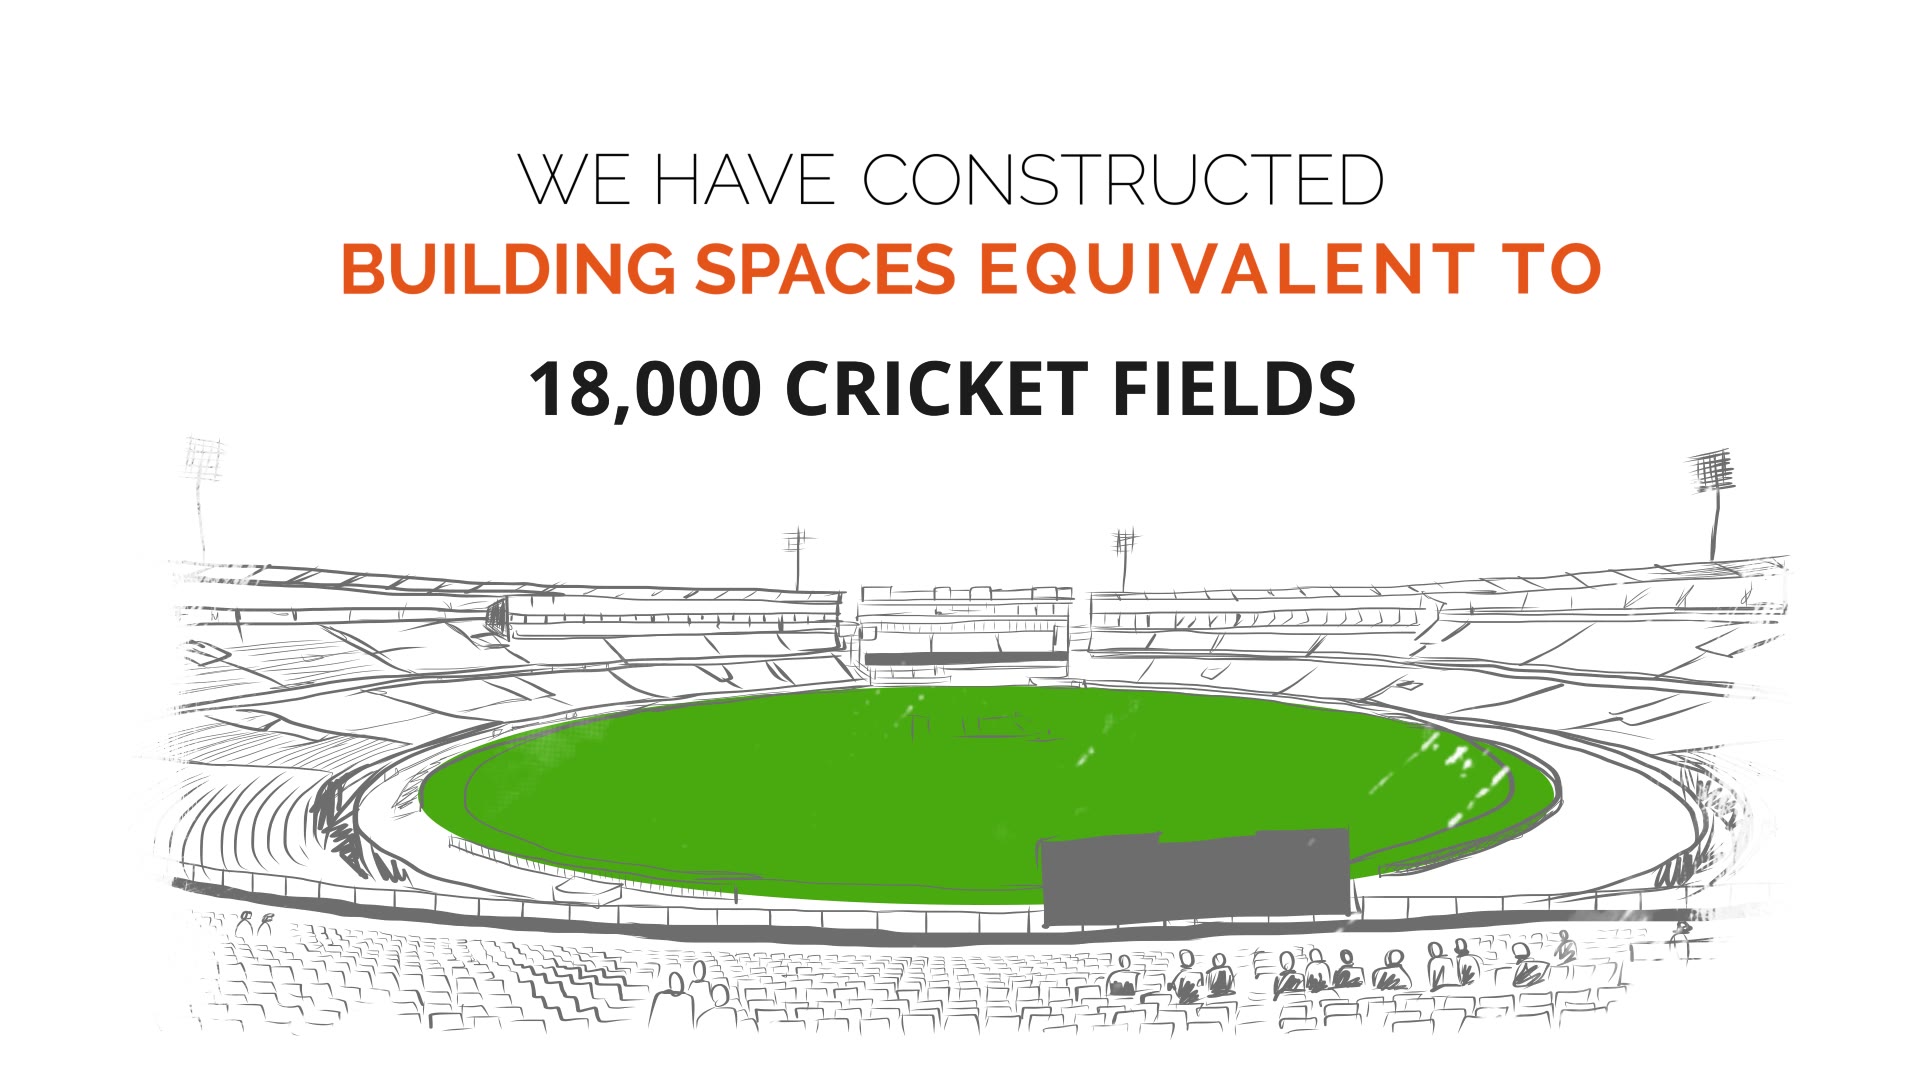 When we Promise, We Deliver.

Sun Builders Group has always kept its ethos intact. We take pride in constructing 10 Million Sq. Ft. spaces which is equivalent to 18,000 Cricket Fields and there's much more to come. 

#SunBuilders #SunBuildersGroup #PremiumLiving #Ahmedabad #Gujarat #RealEstate #Residential #Commercial #WePromiseWeDeliver #Construction